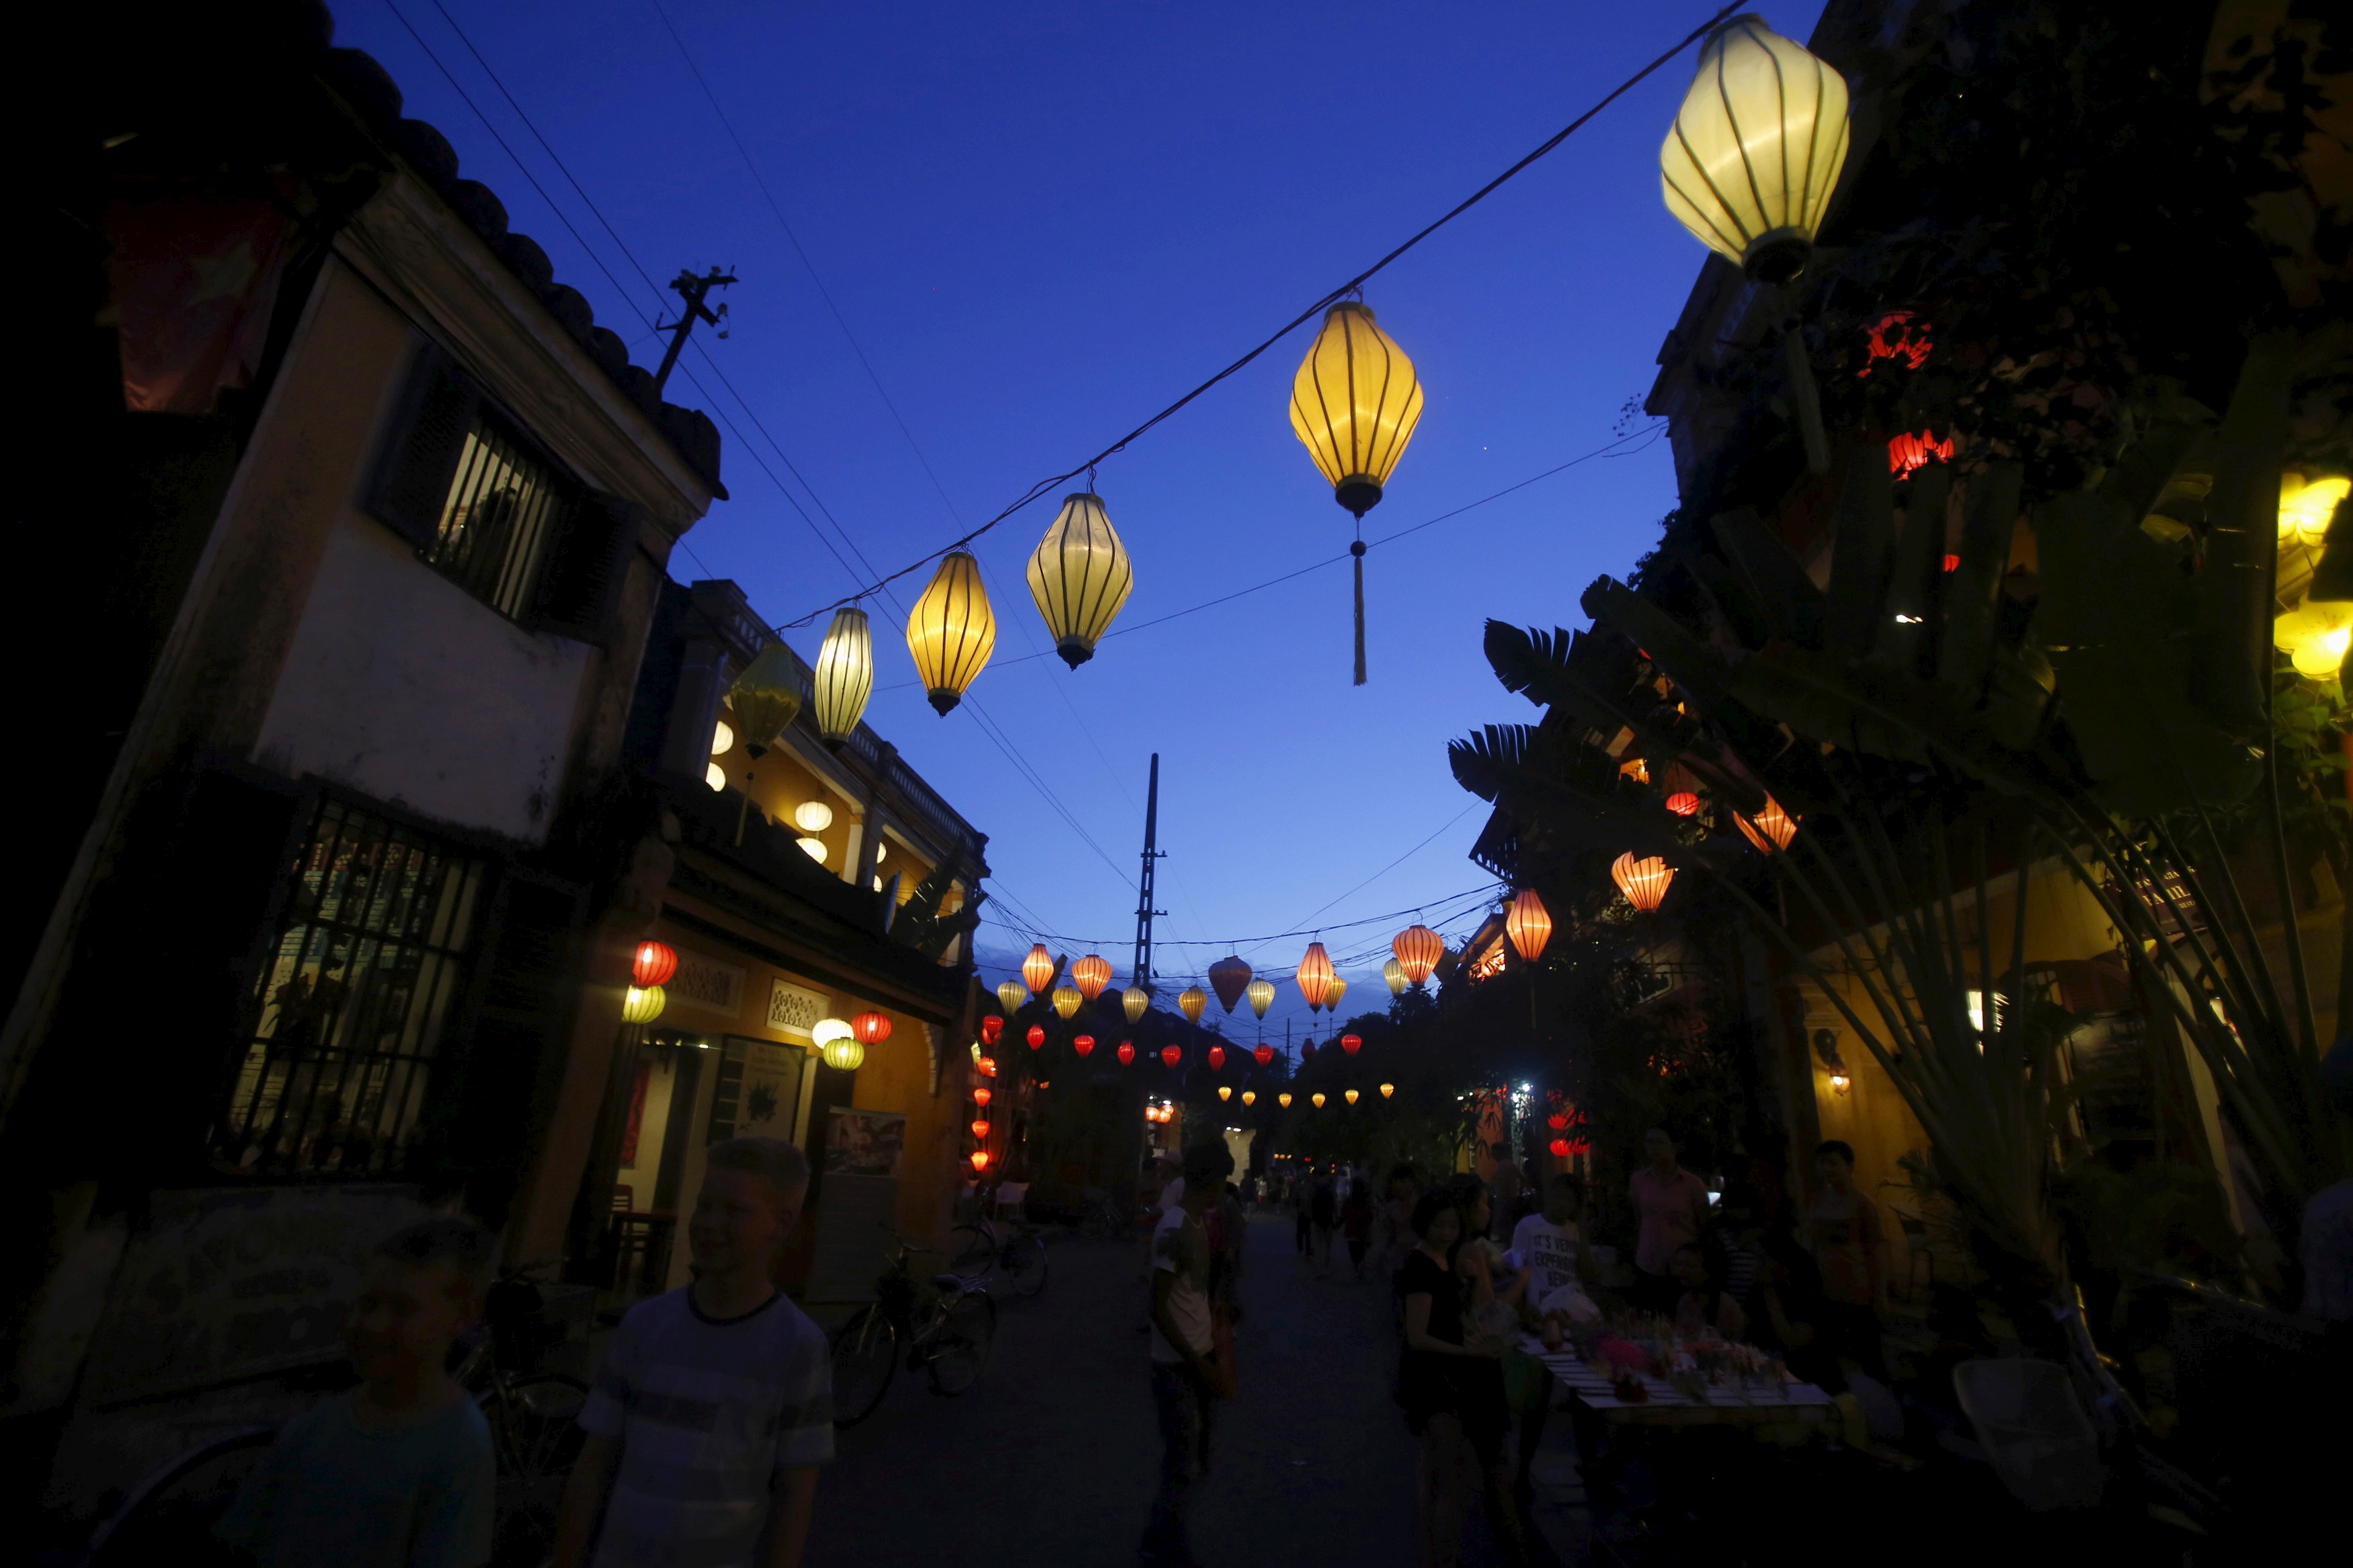 Lanterns hang on a street in Vietnam's central ancient town of Hoi An, a UNESCO heritage site